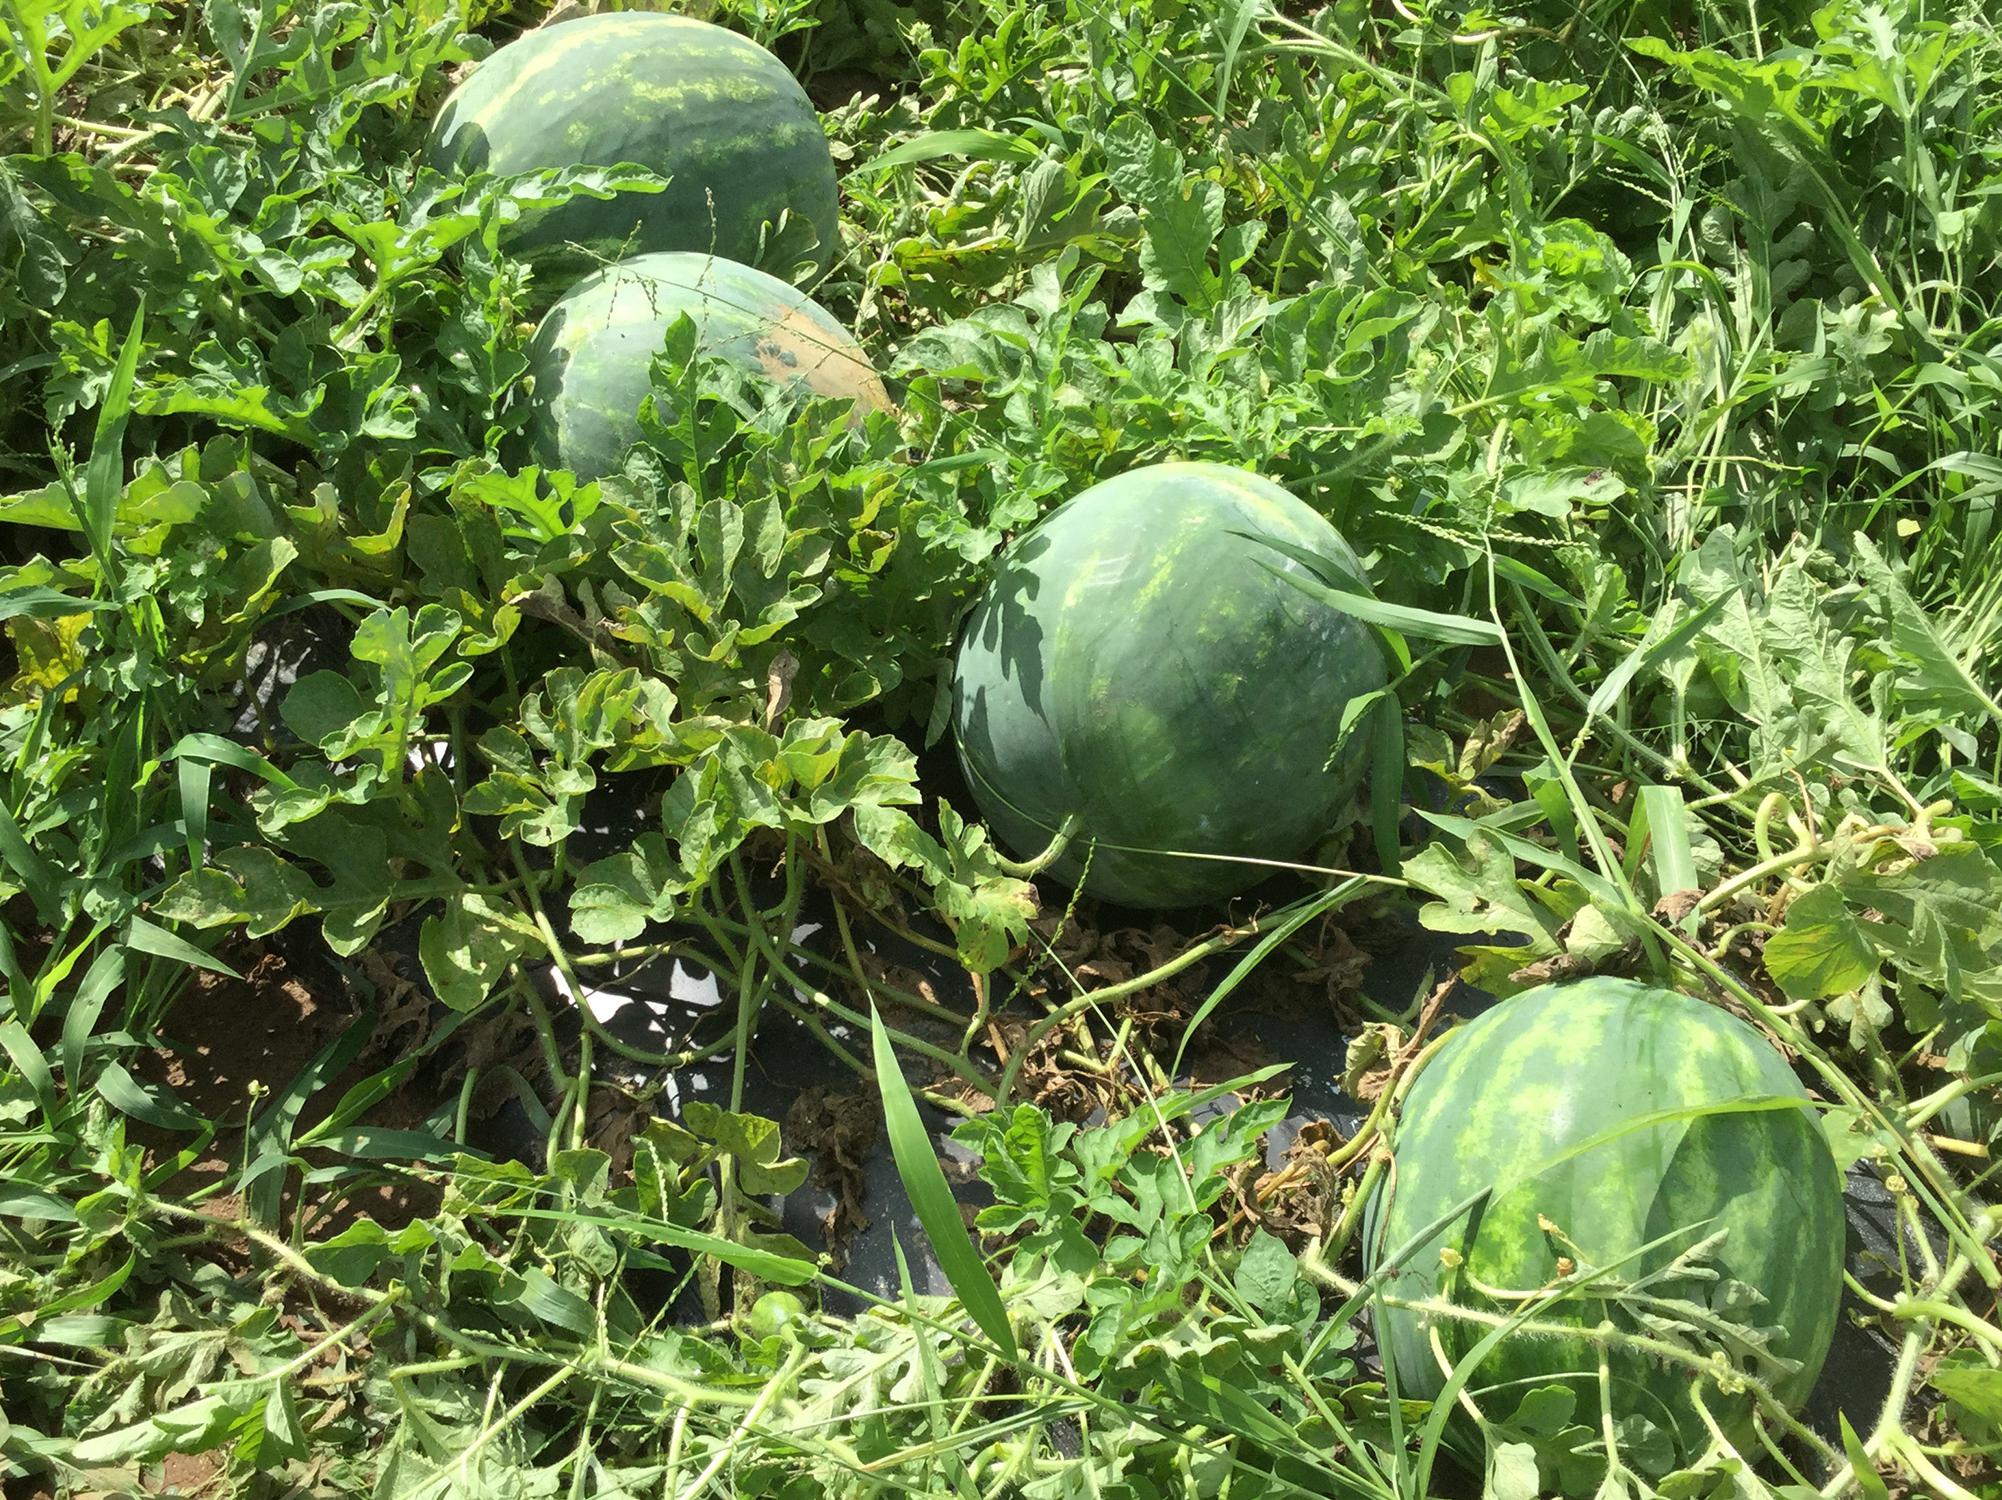 Four large, ripe watermelons lie among vines in the field.